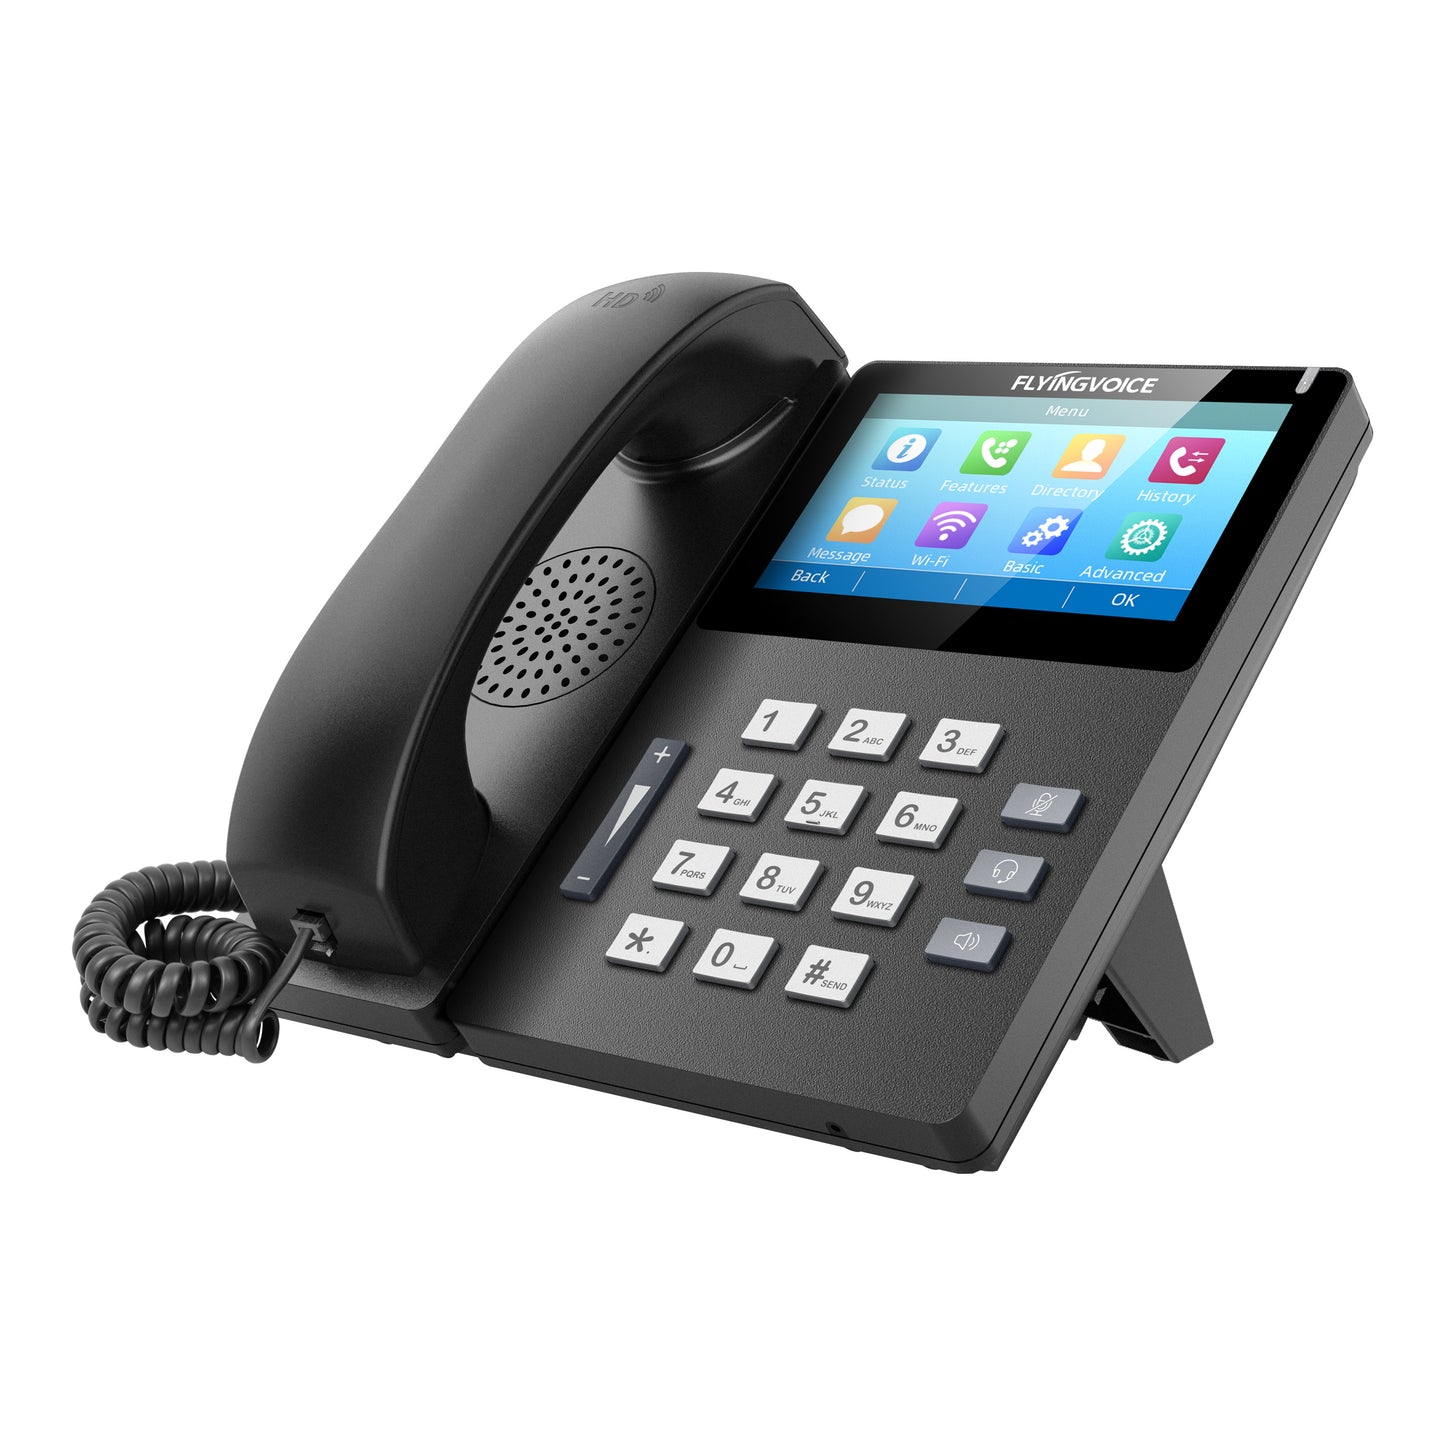 FIP15G Plus Elite Touch Screen Wi-Fi IP Phone